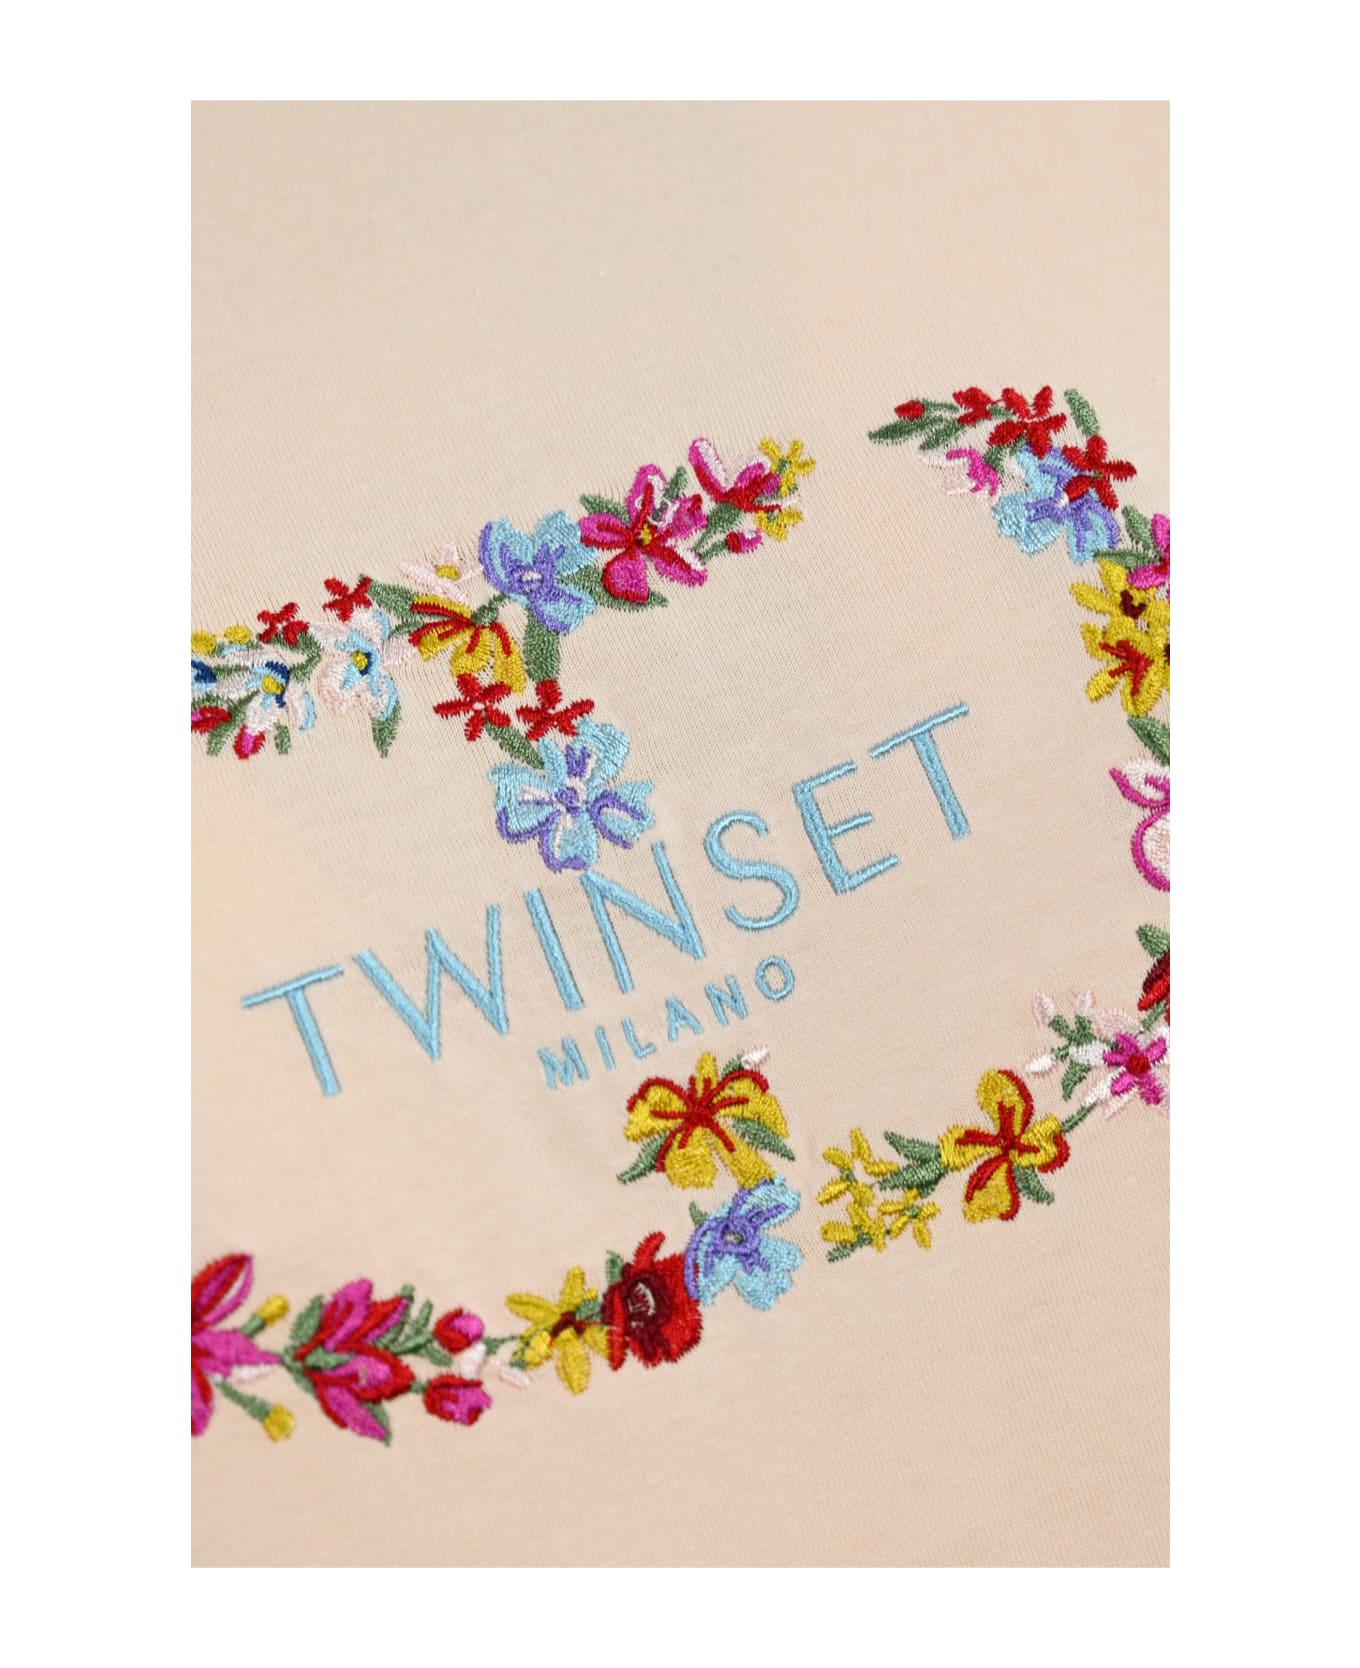 TwinSet T-shirt With Floral Embroidery - Cupcake pink